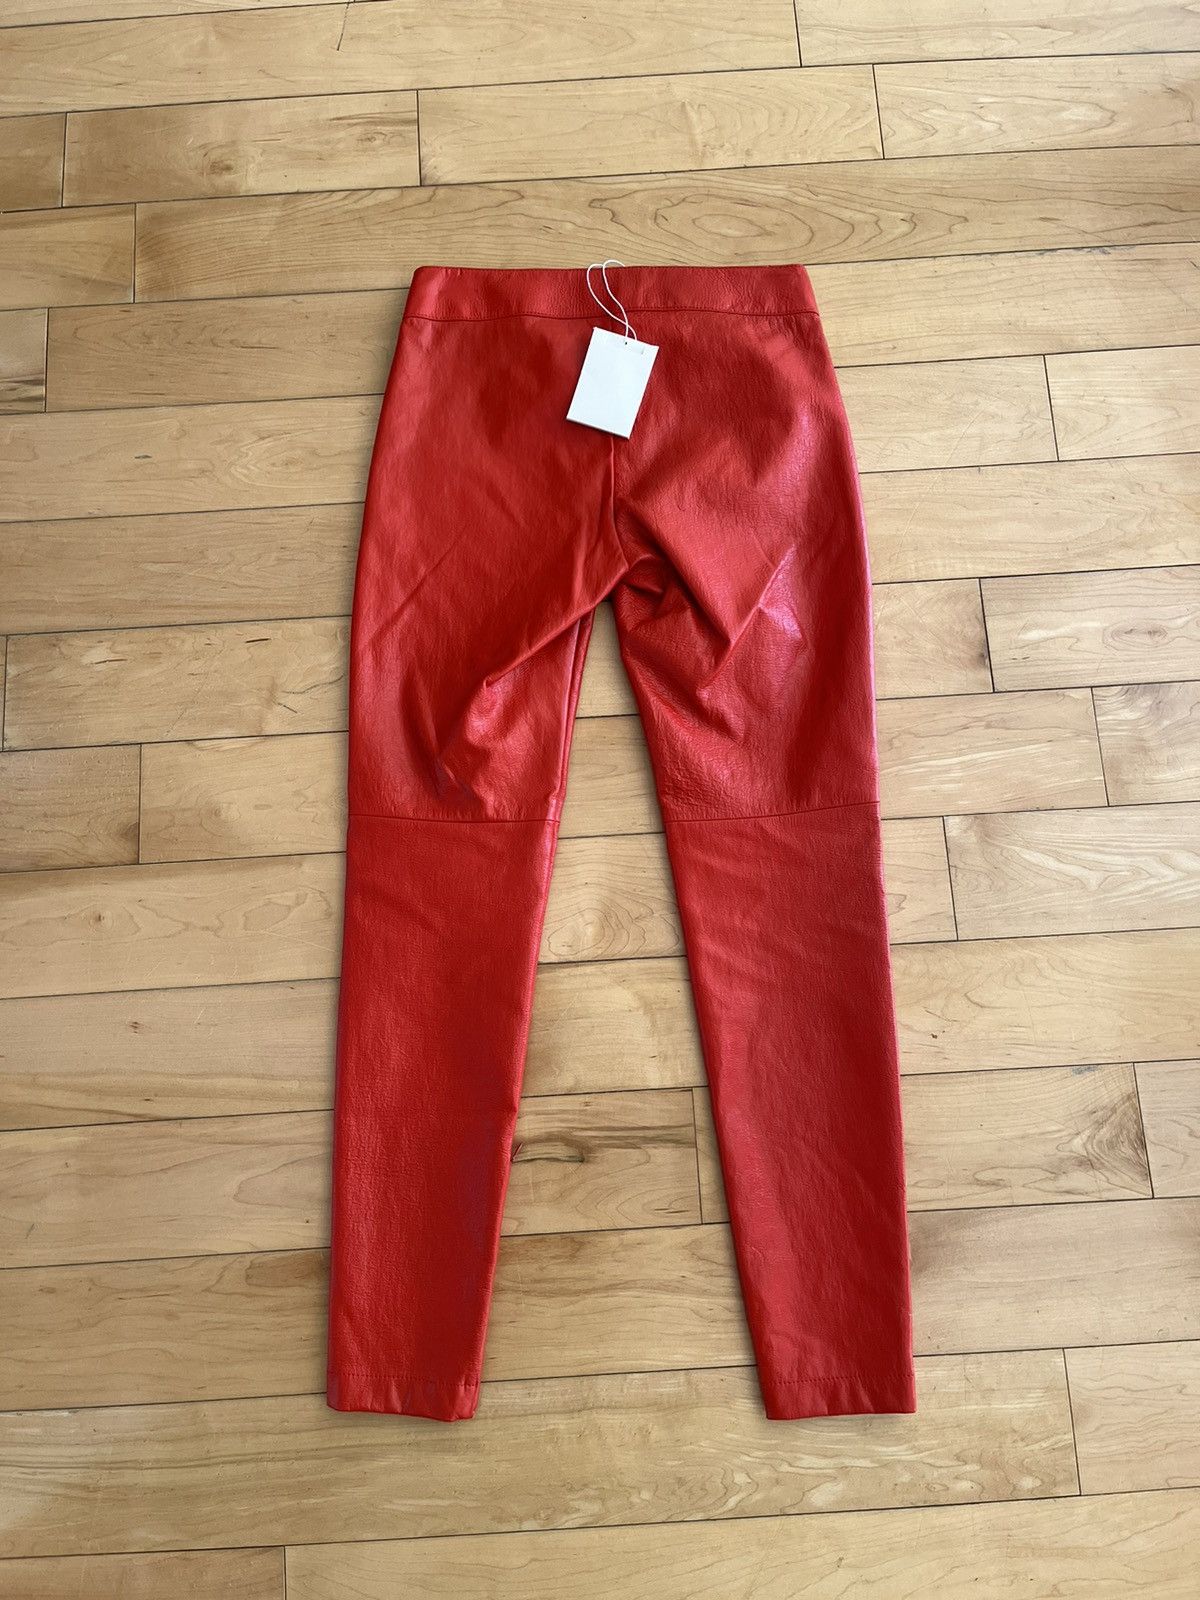 NWT - Givenchy Skinny Calfskin Leather Pants - 2